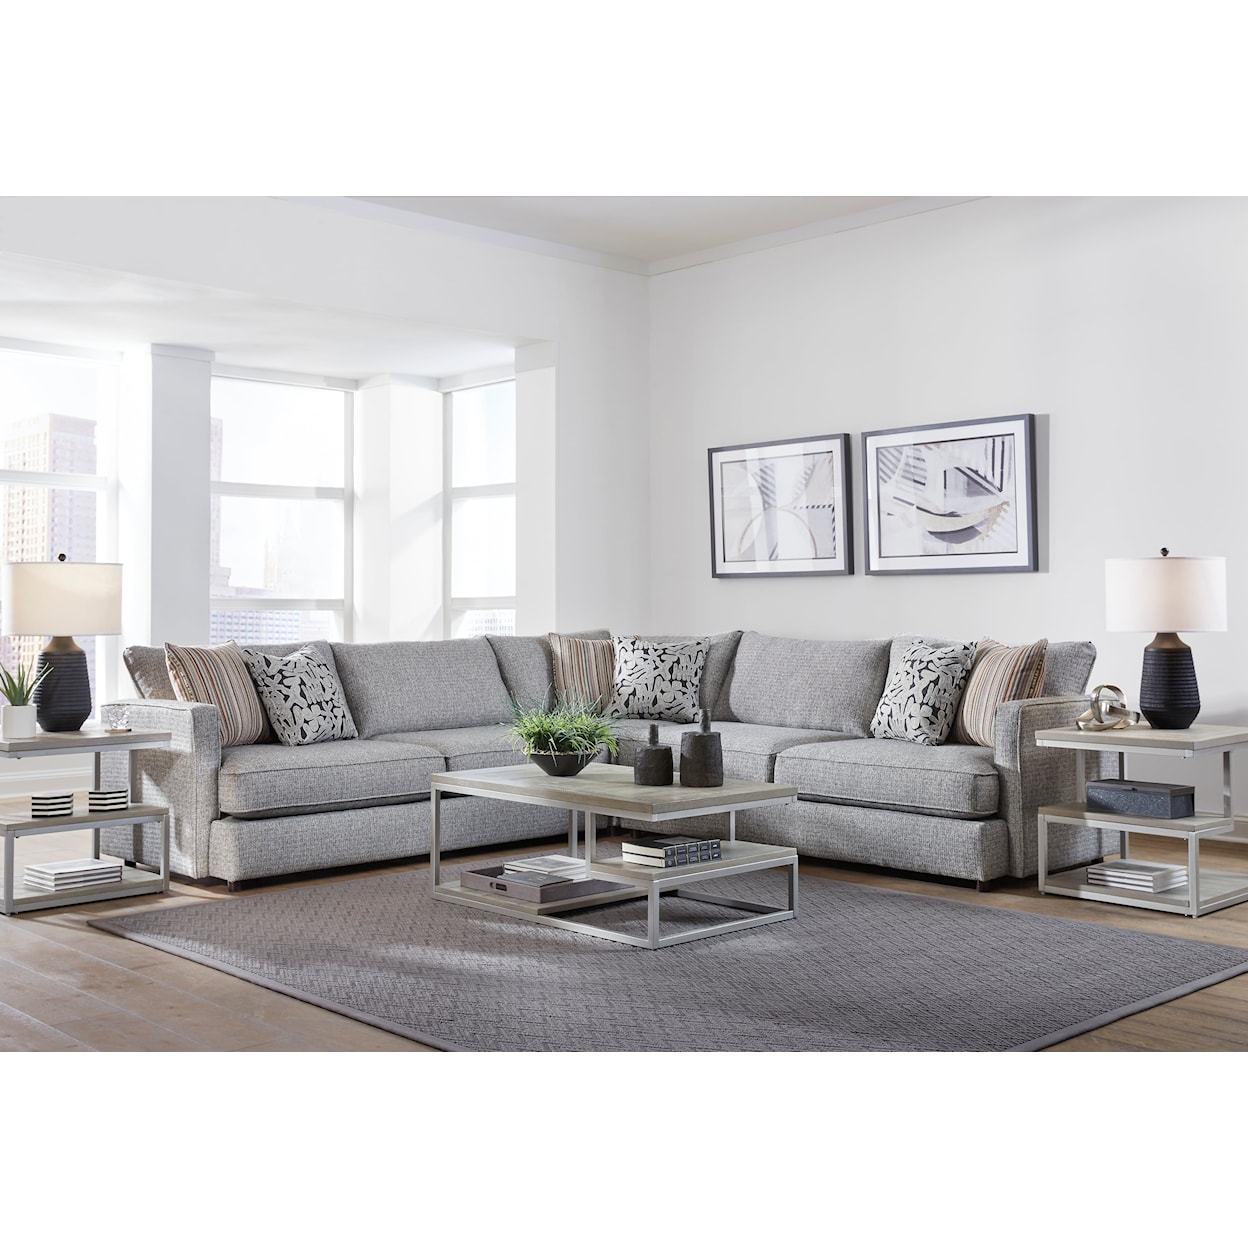 The Mix Finley 4-Seat Sectional Sofa